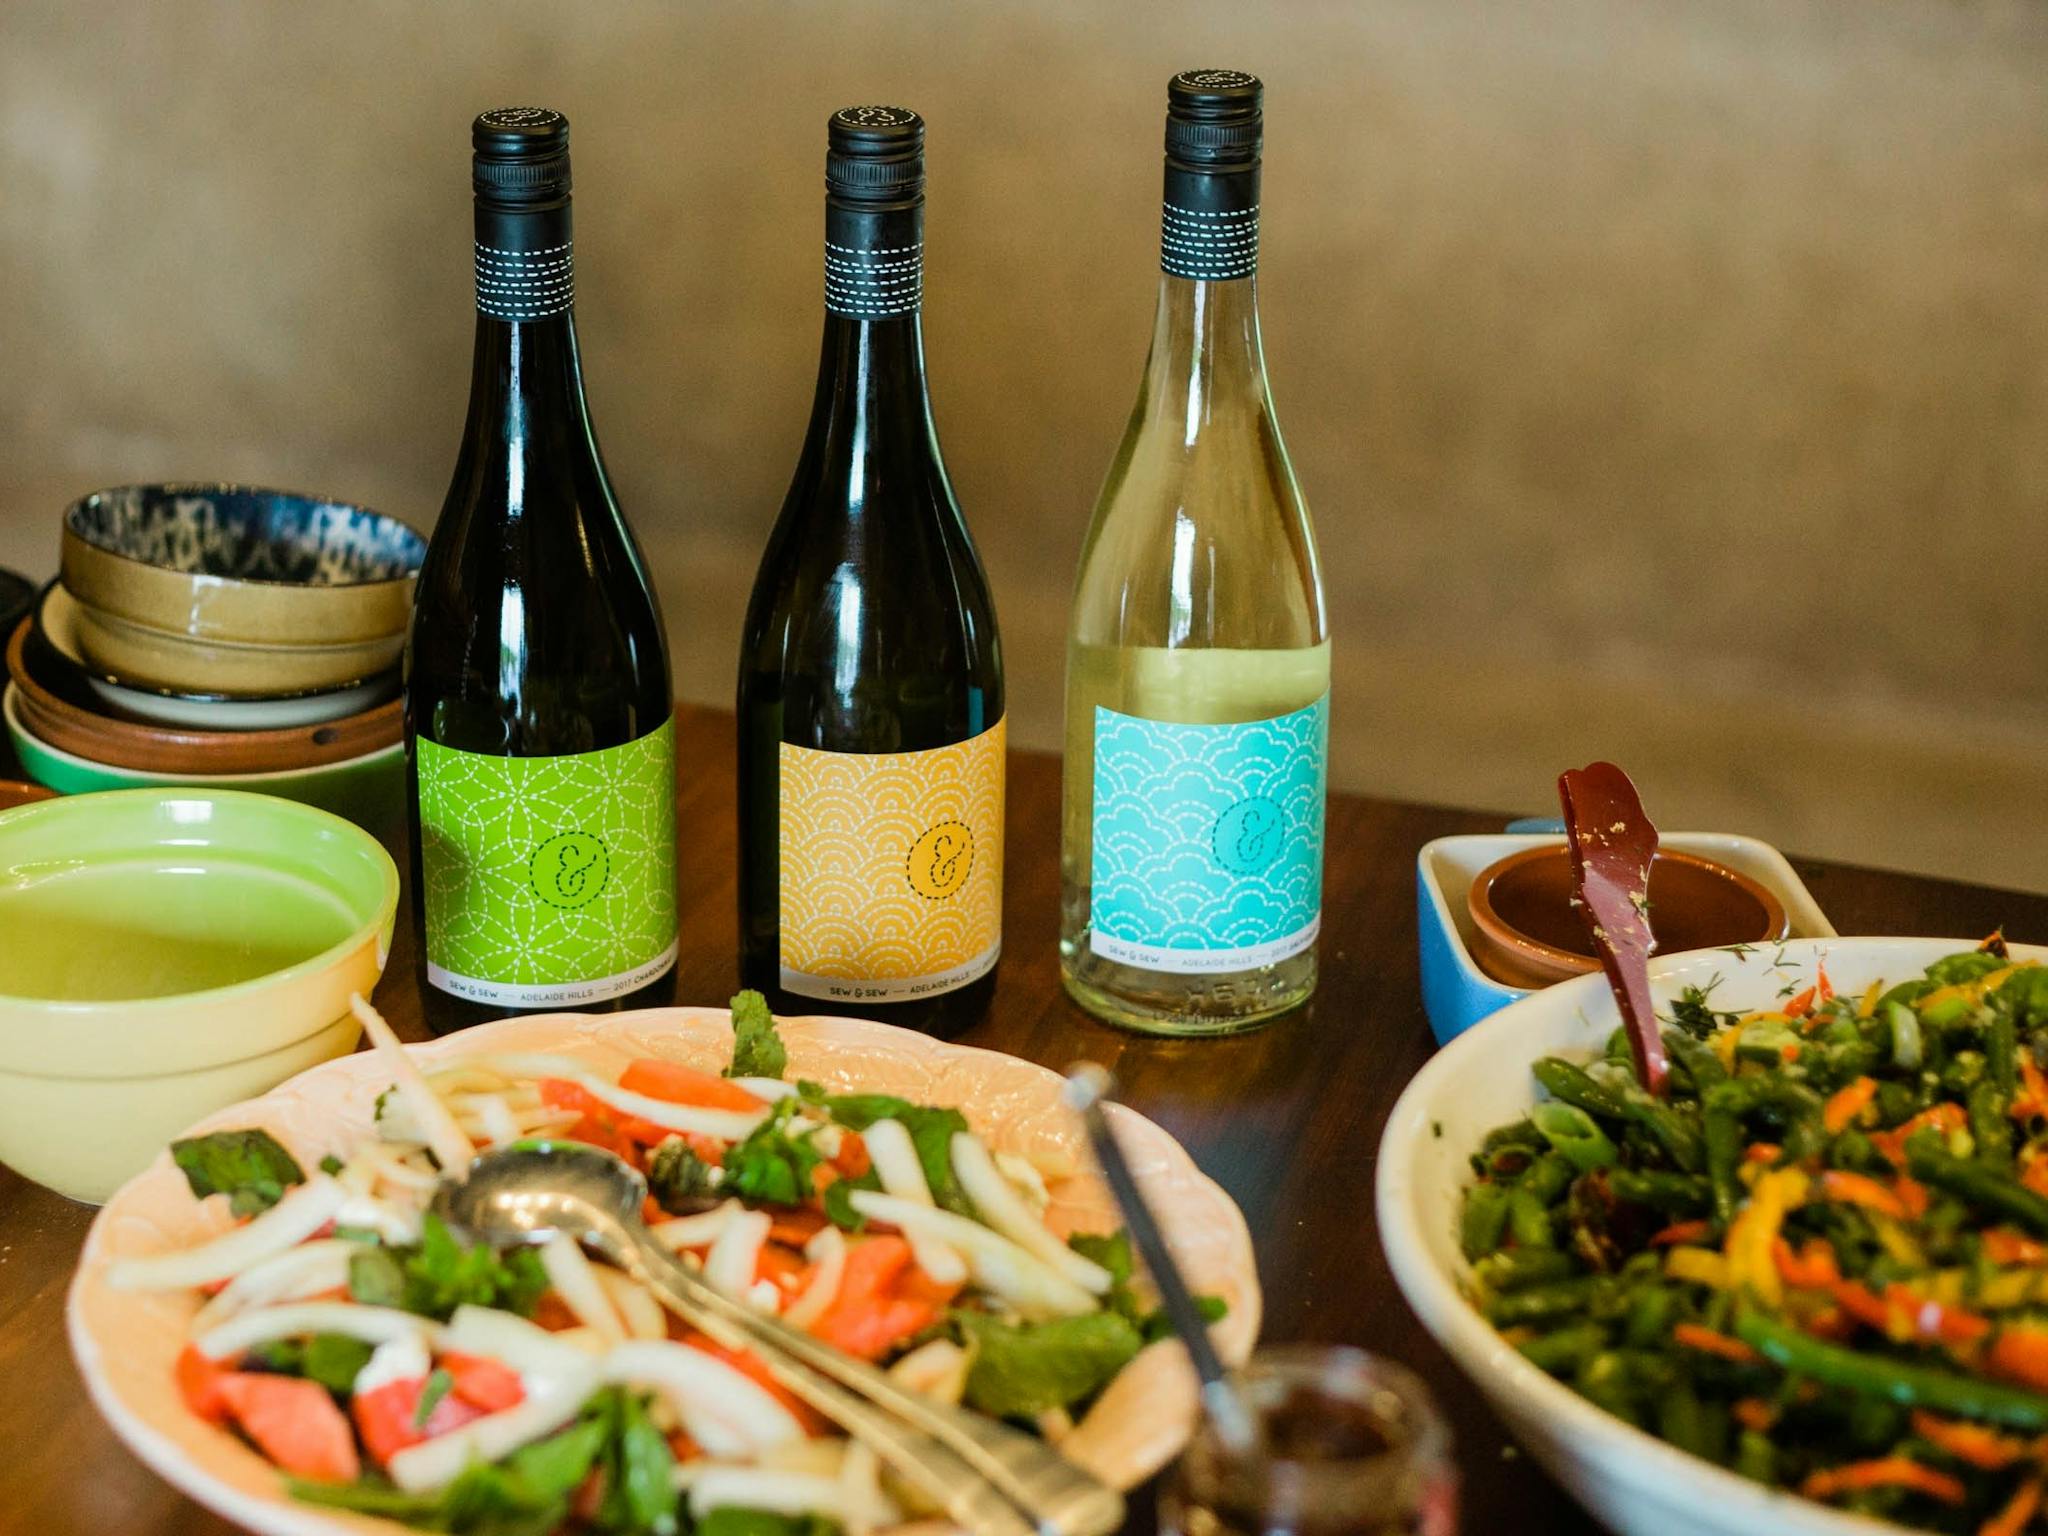 Inside the cellar door looking at a table filled with delicious salads and bottles of Sew & Sew wine